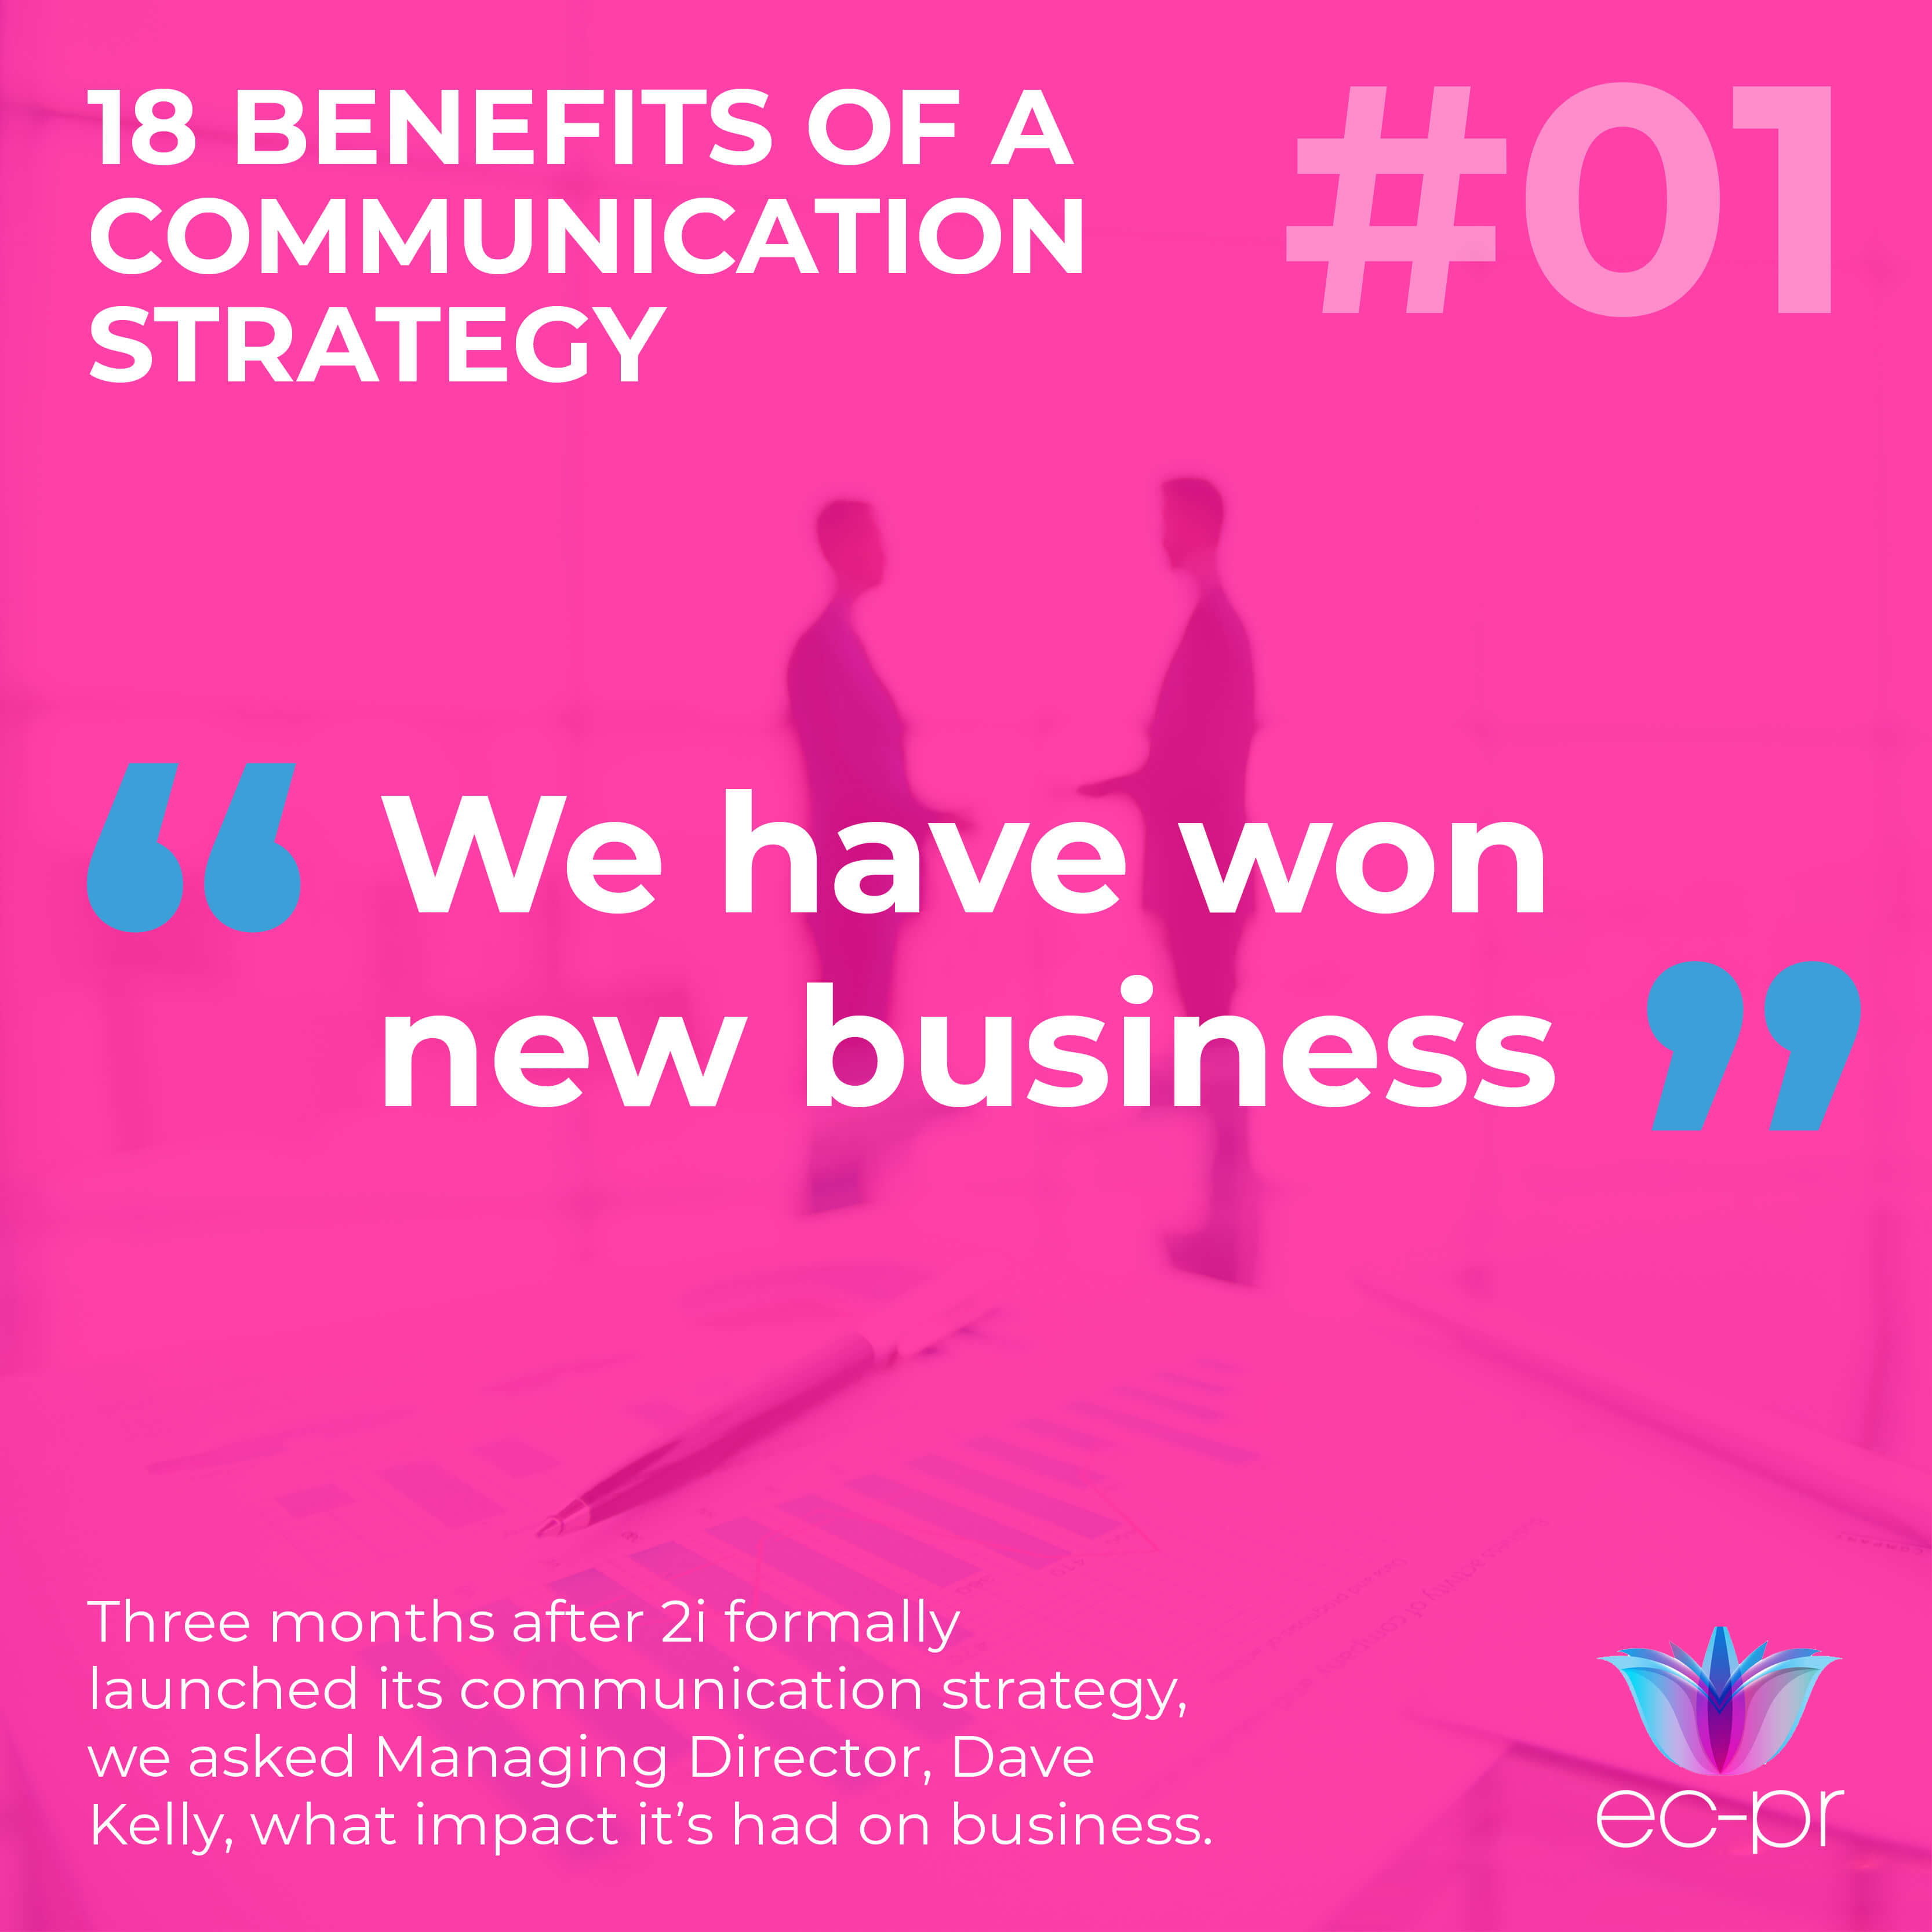 We have won new business because of our communication strategy